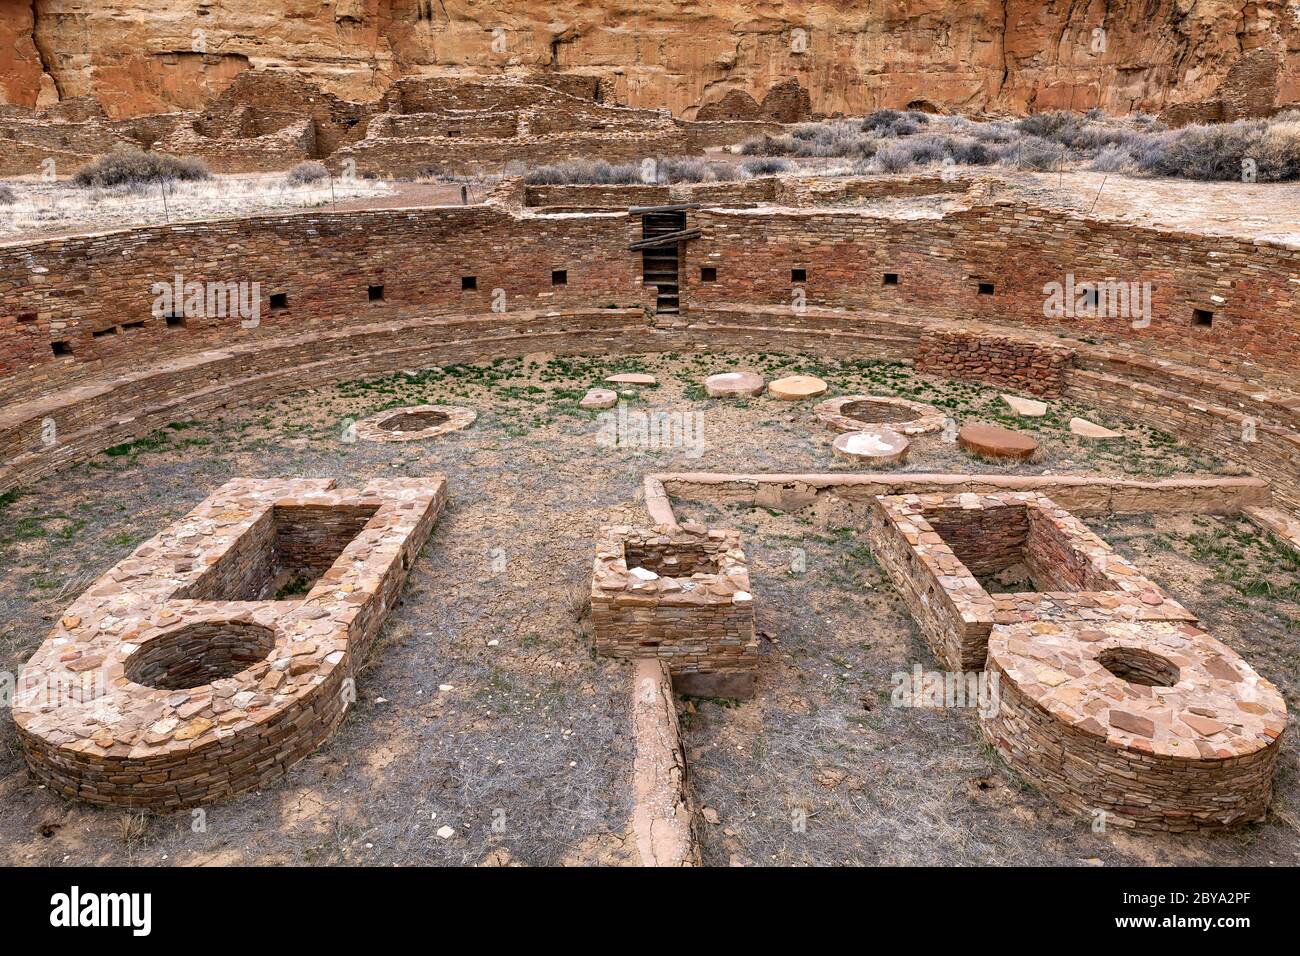 NM00616-00...NEW MEXICO - Steinmauern in Chetro Ketl im Chaco Culture National Historic Park. Stockfoto